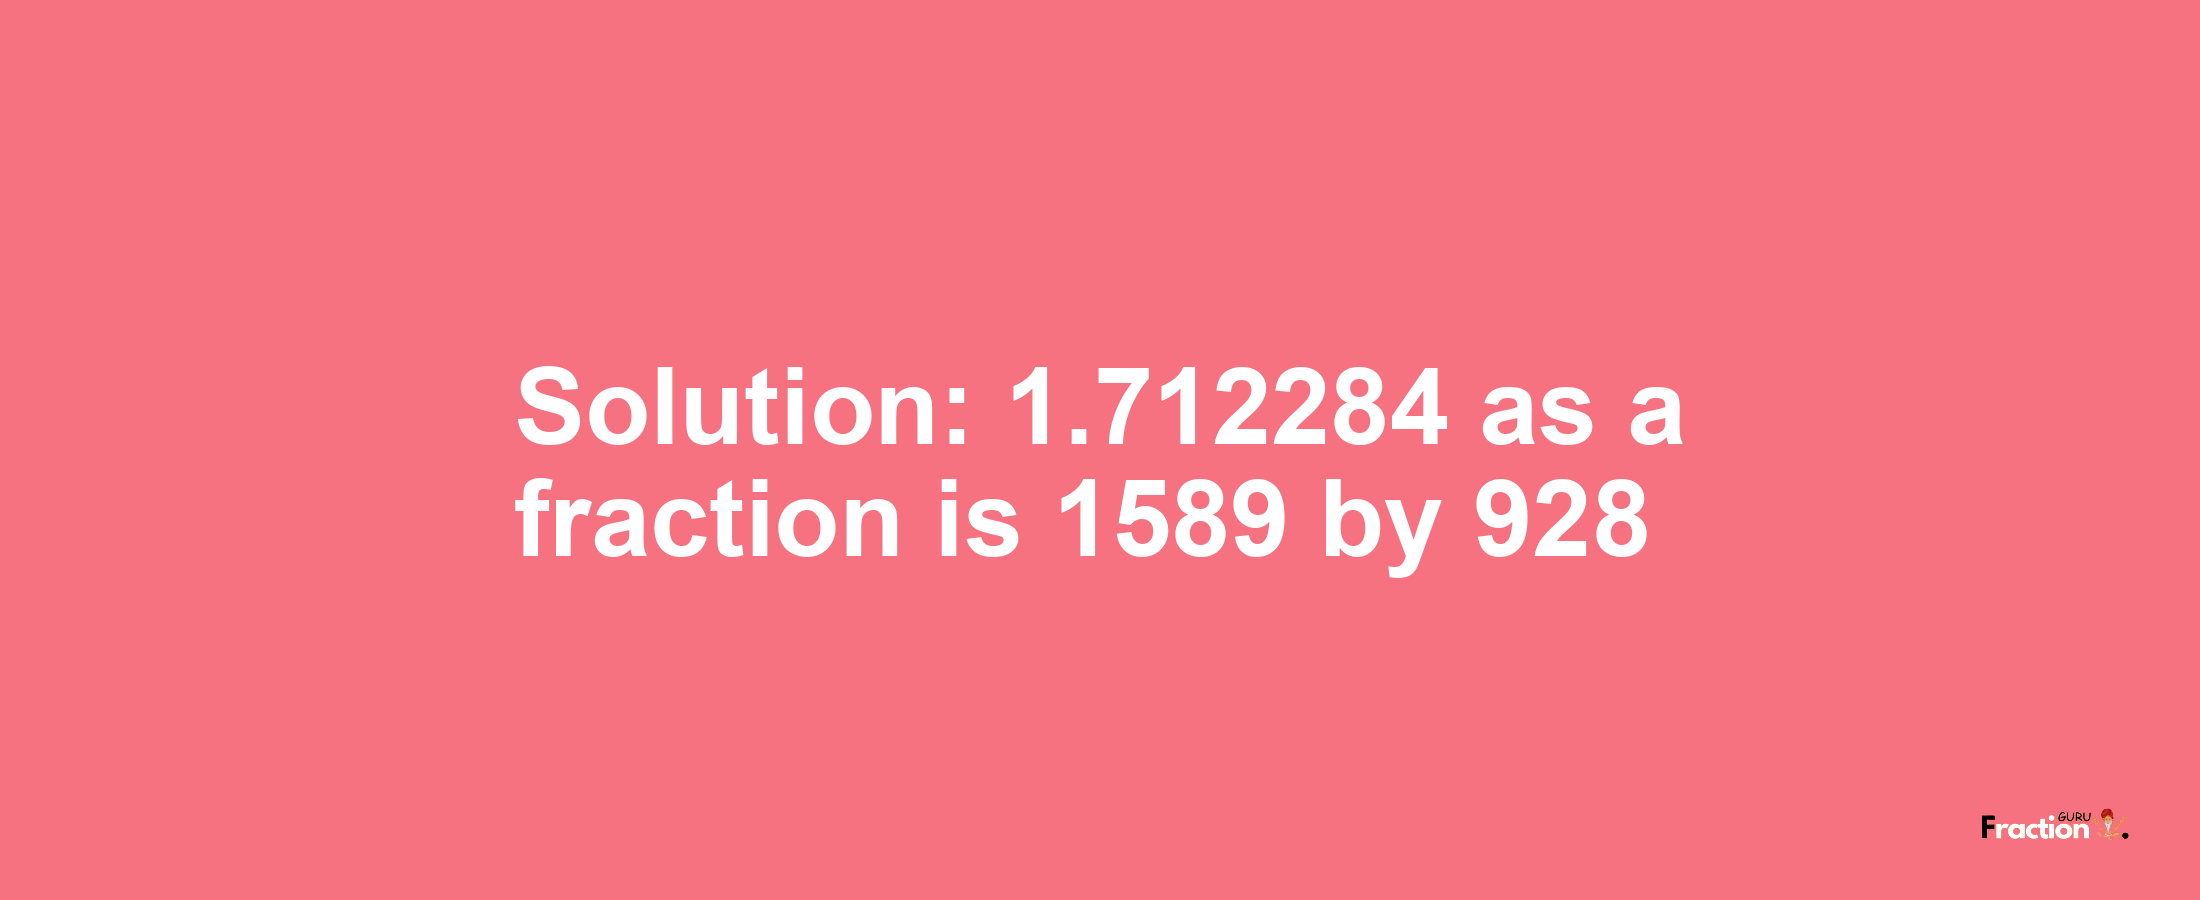 Solution:1.712284 as a fraction is 1589/928